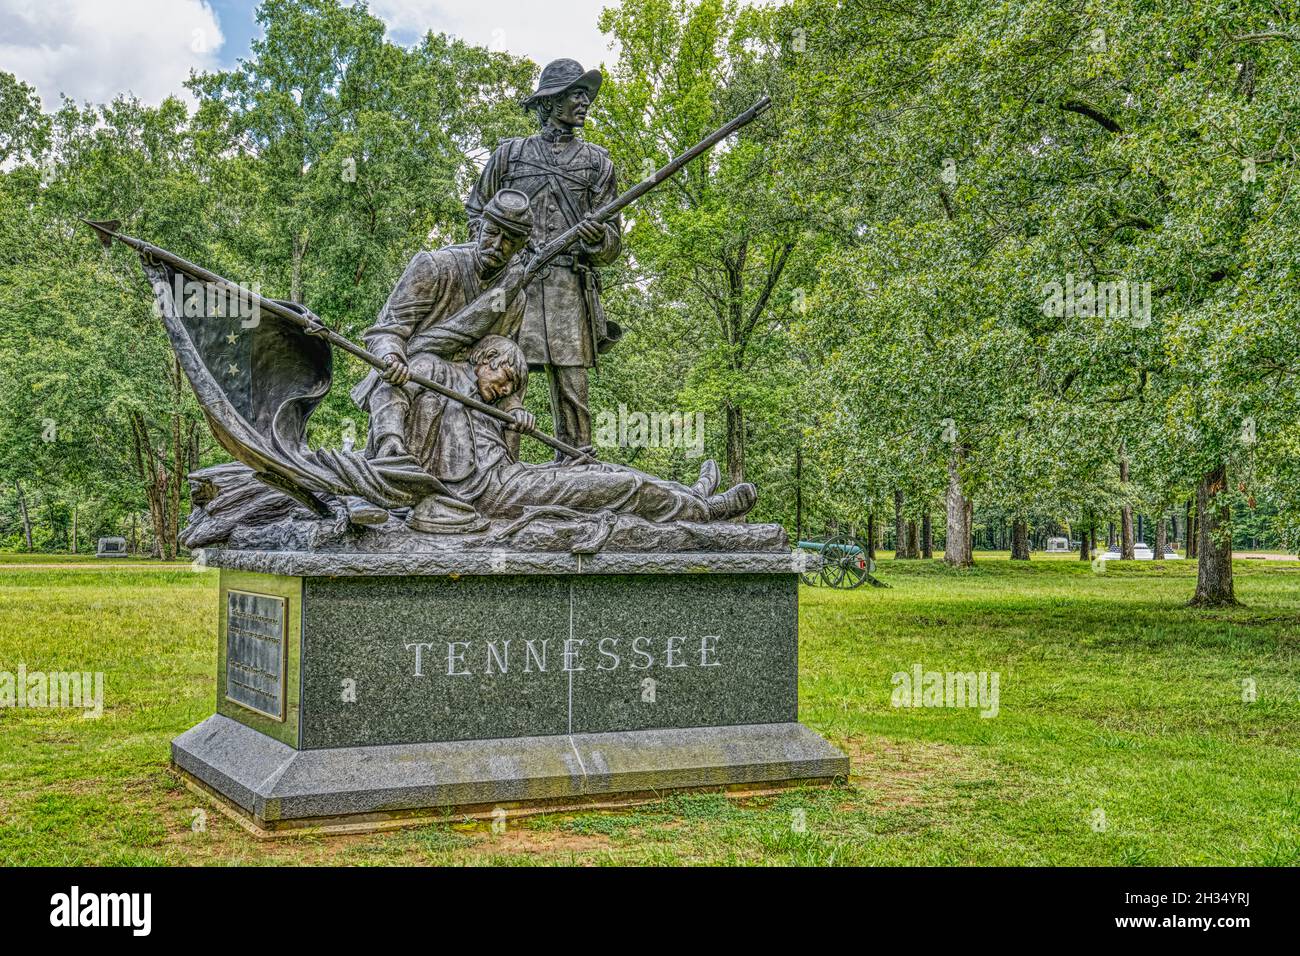 The Tennessee Monument on the battlefield of Shiloh National Military Park in Tennessee. Stock Photo